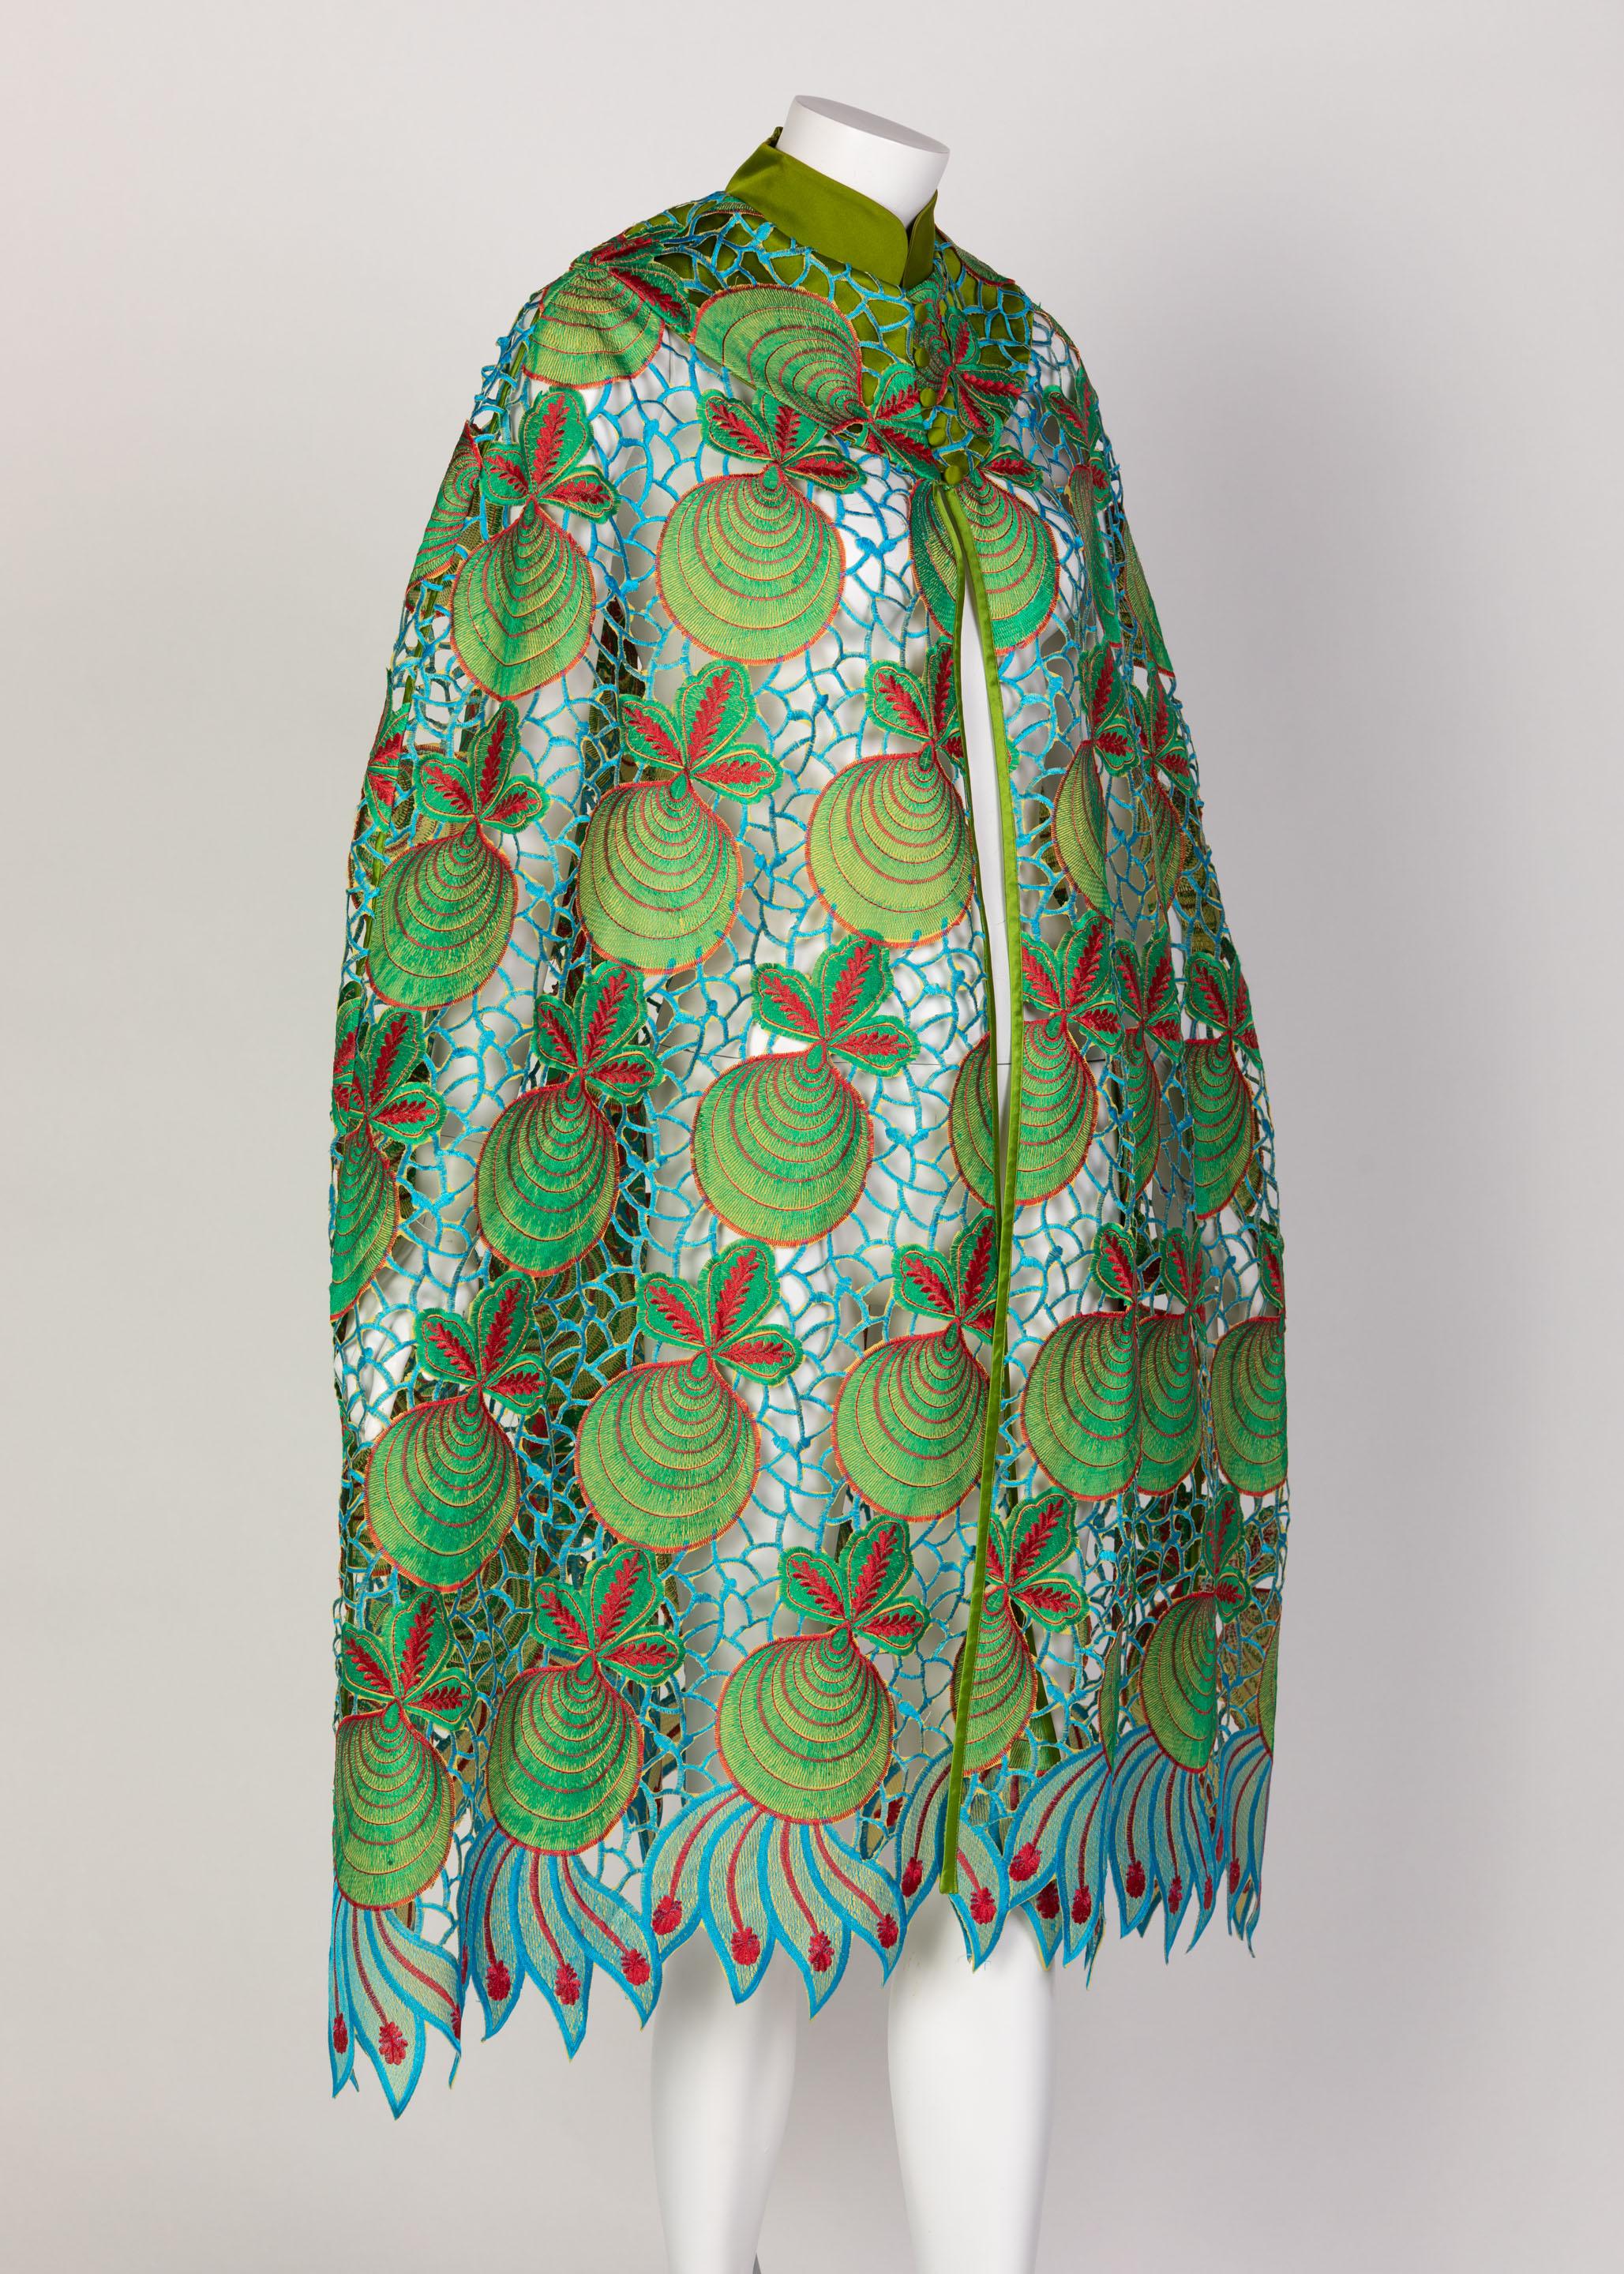 Duro Olowu Green Blue Red Cut Out Silk Lace Cape, 2012 For Sale 1